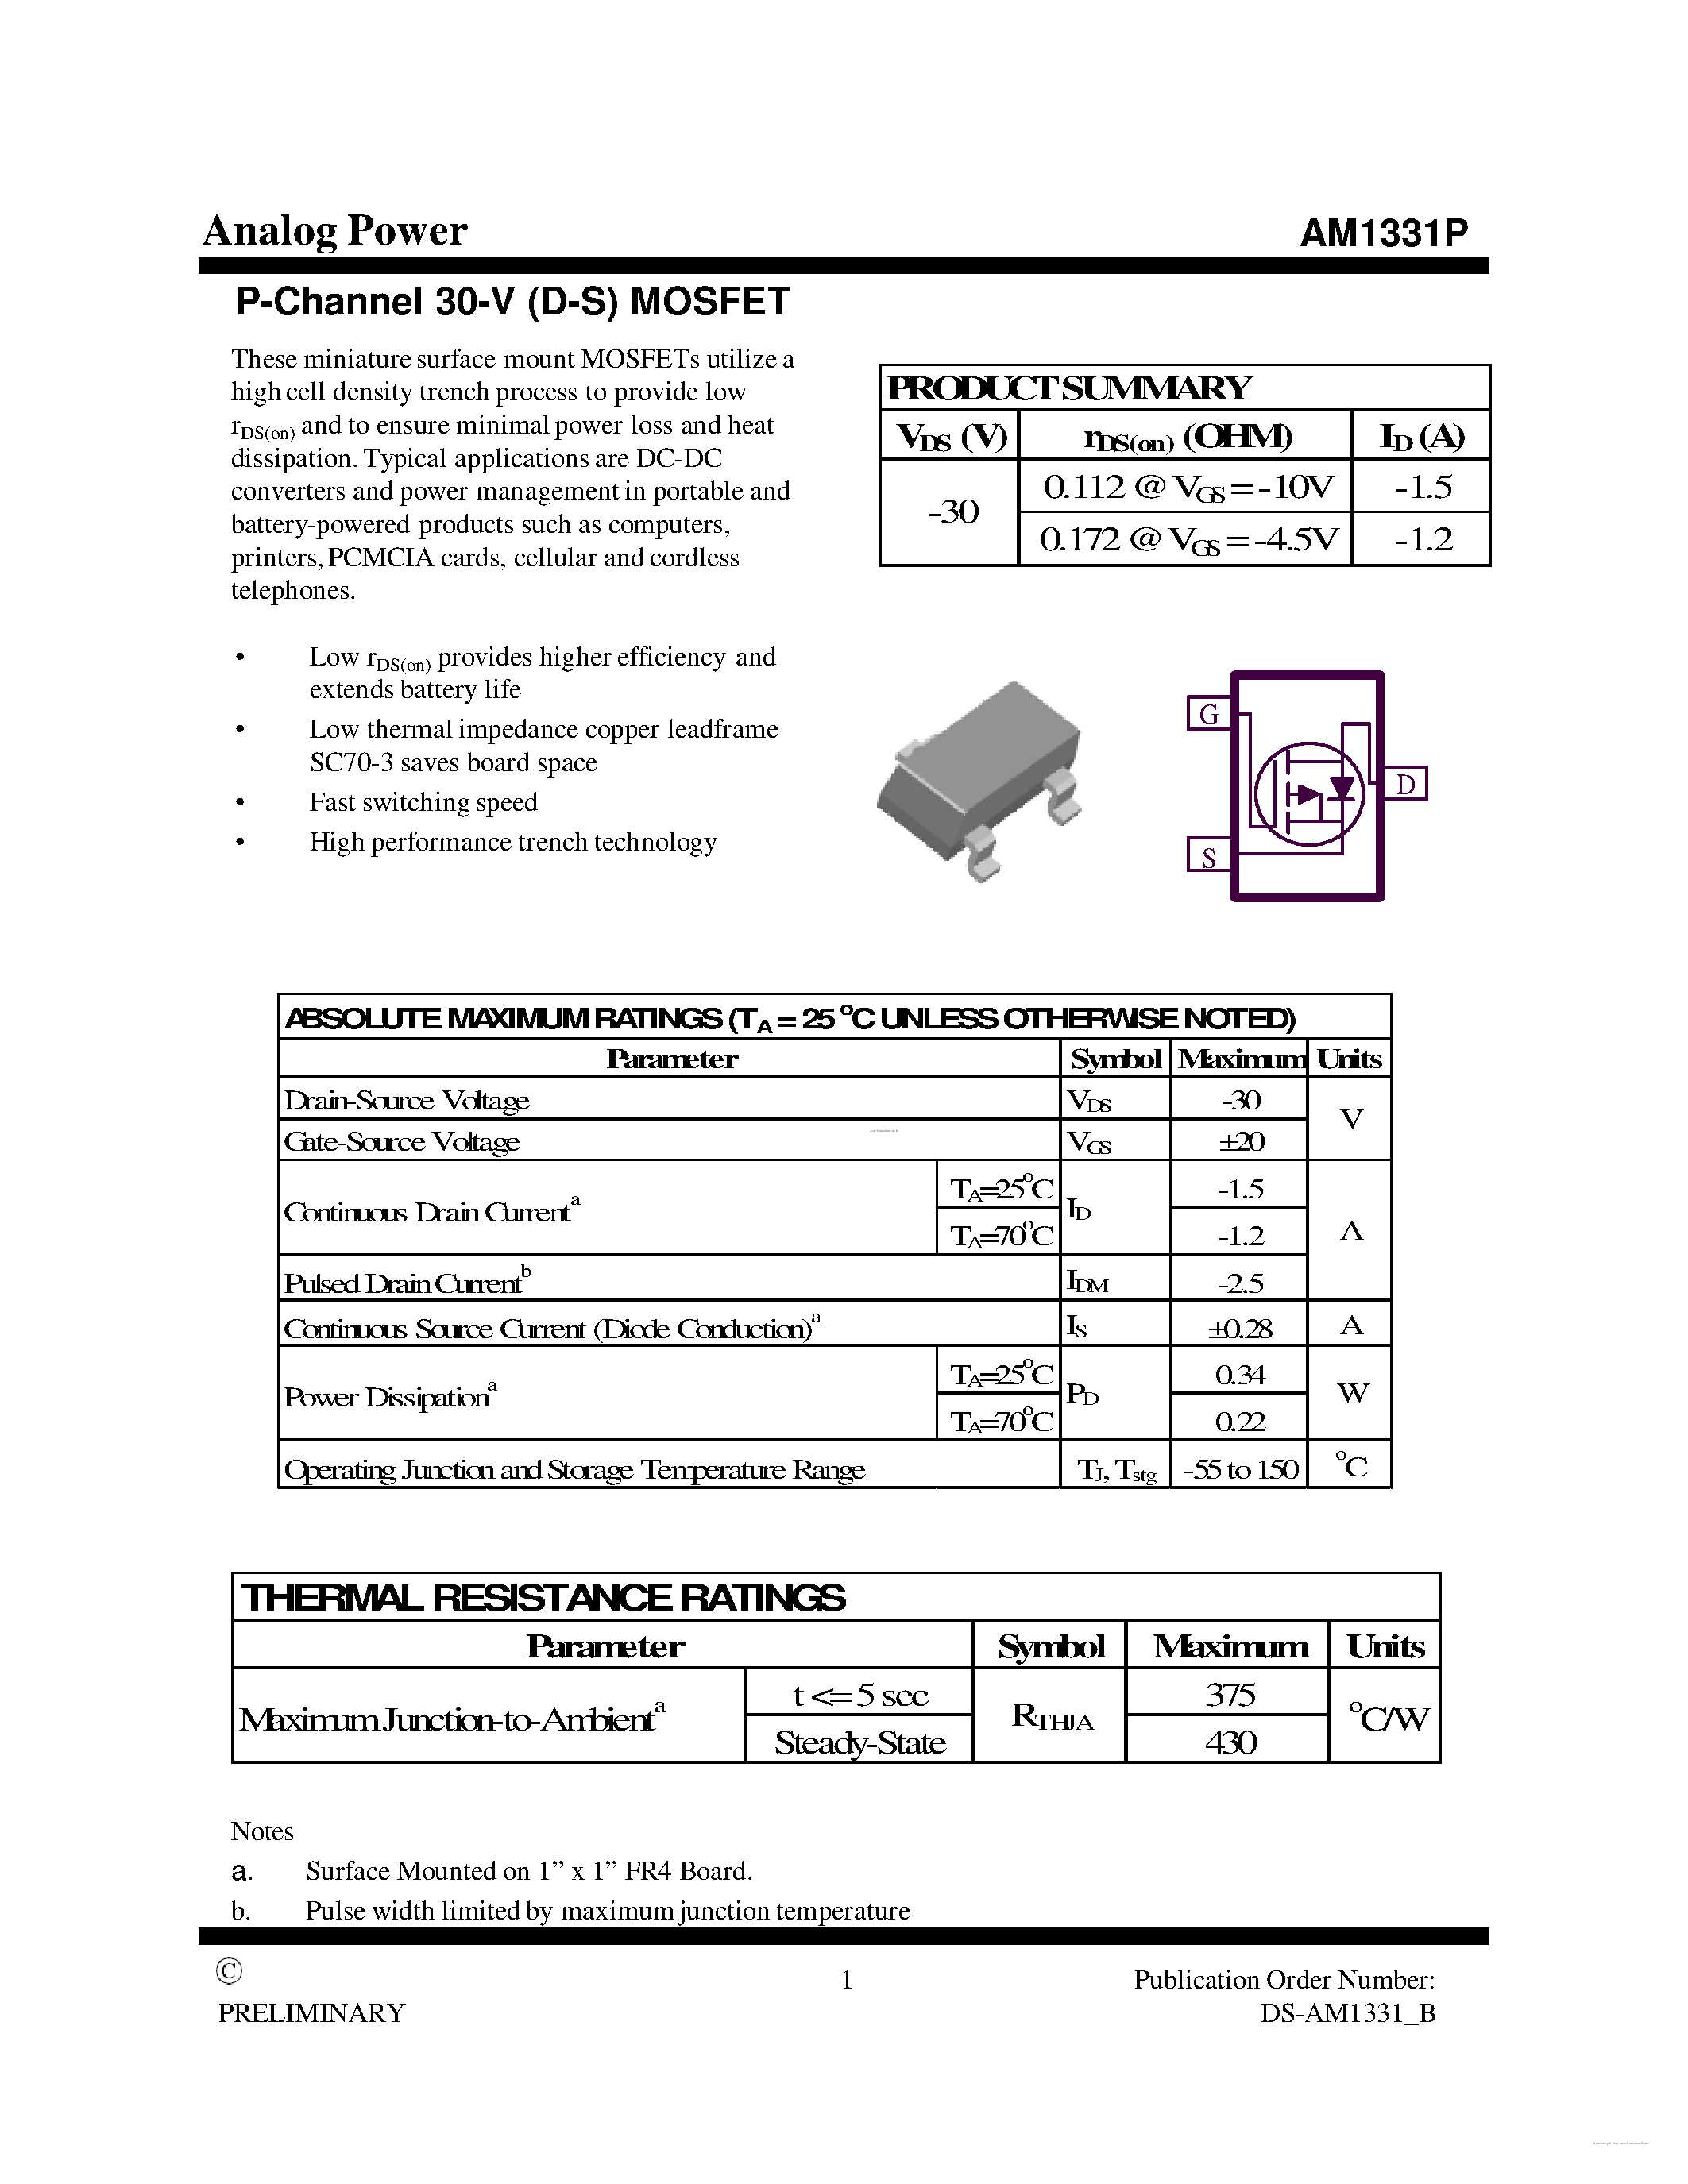 Datasheet AM1331P - P-Channel 30-V (D-S) MOSFET page 1